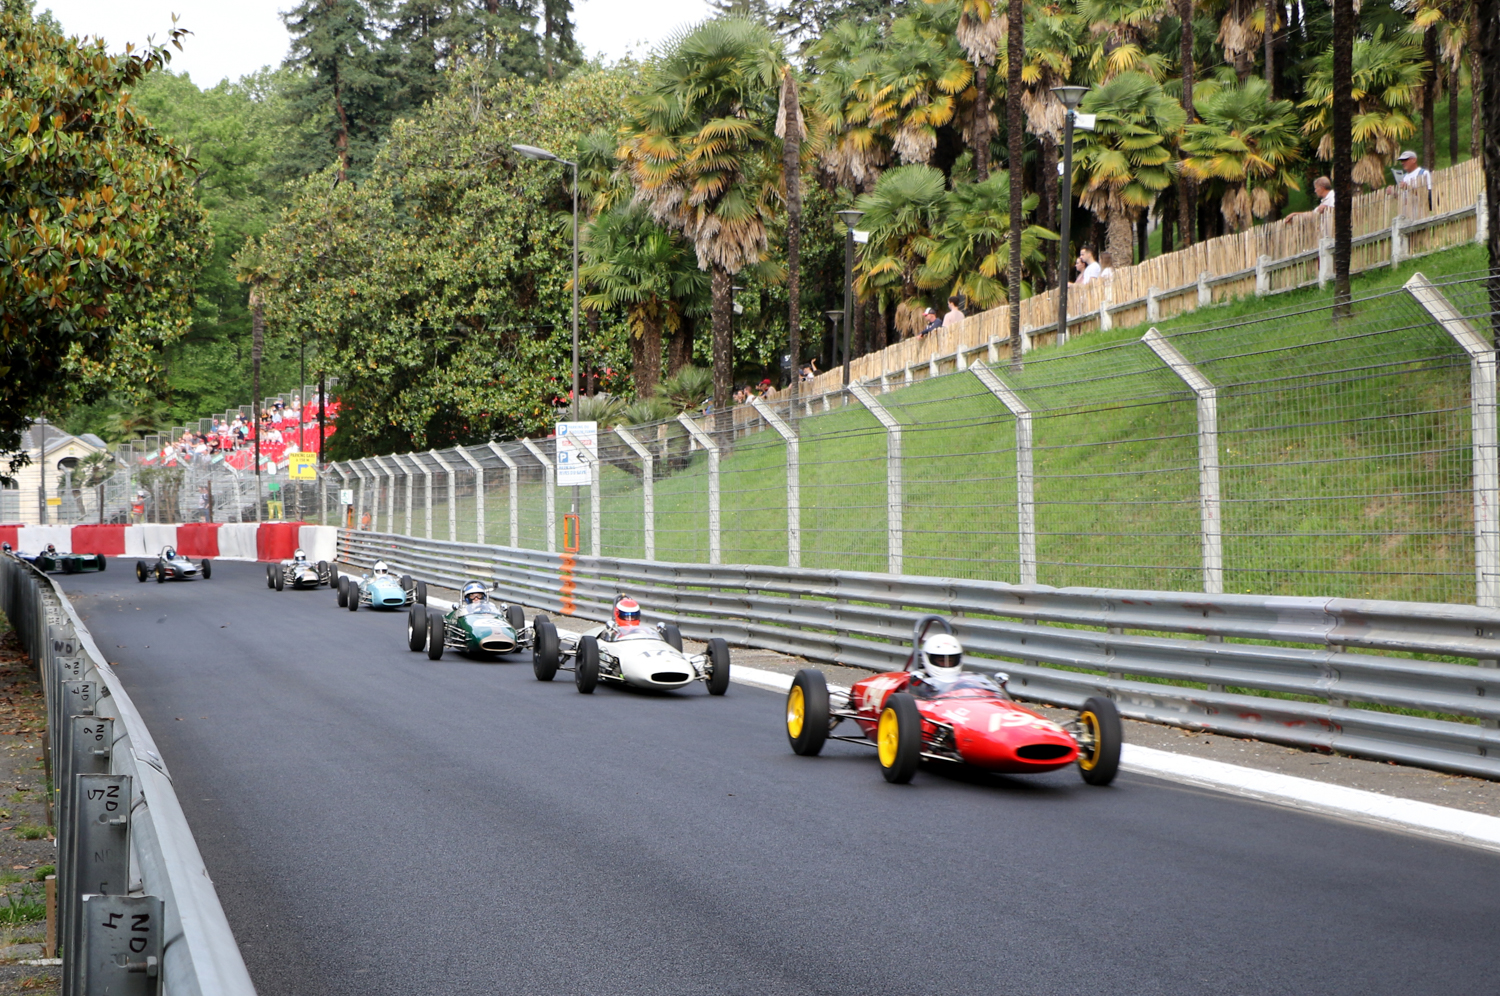 FORMULA JUNIOR FIELD STREAMS UP THE HILL AFTER THE START. Picasa